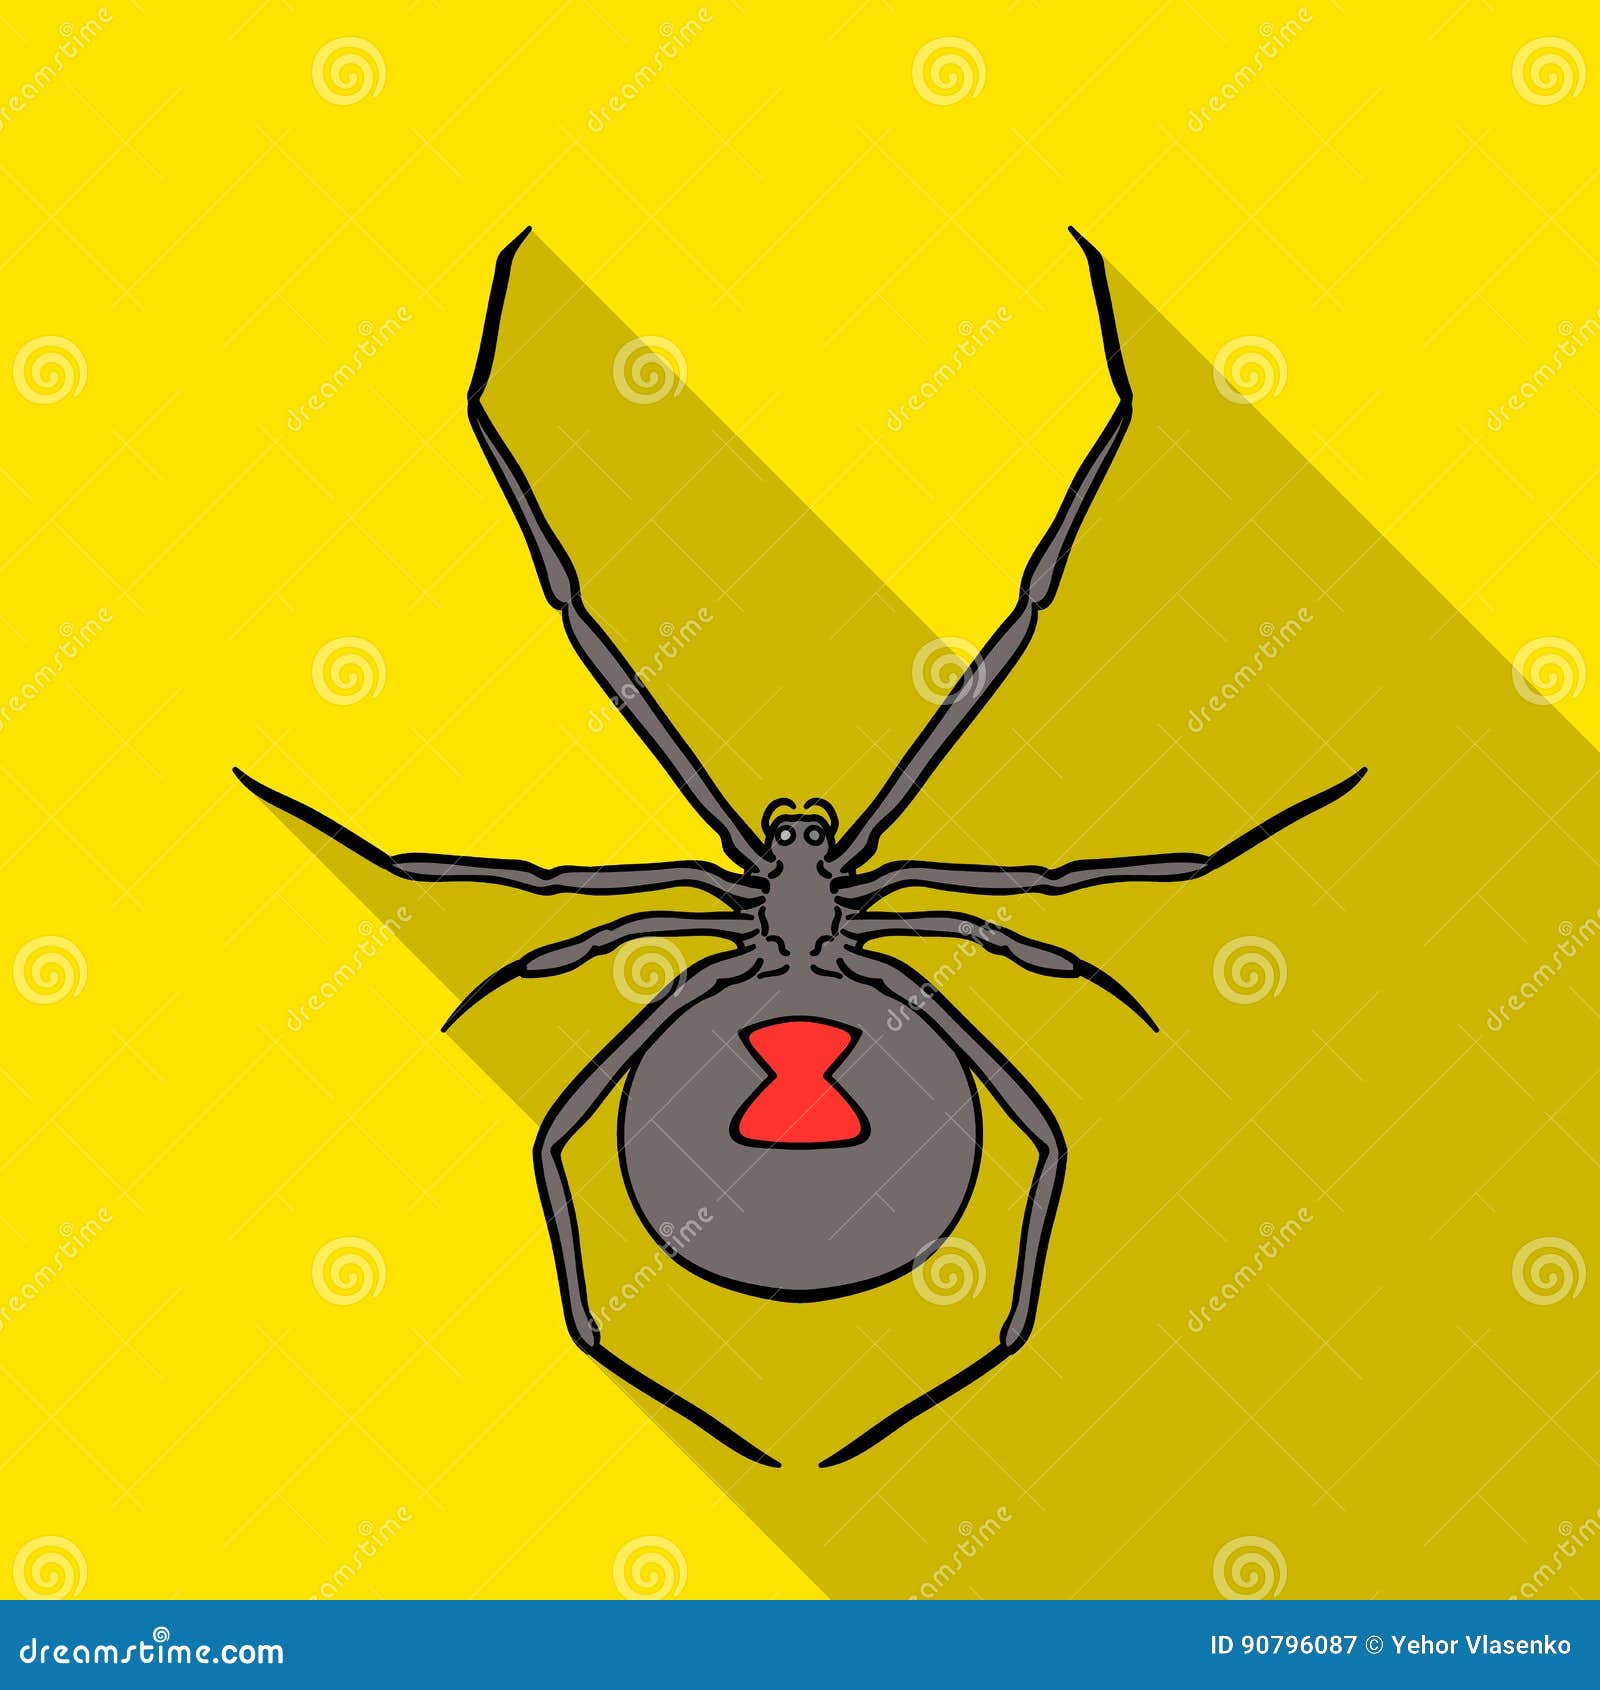 Black Widow Spider Icon In Flat Style Isolated On White ...